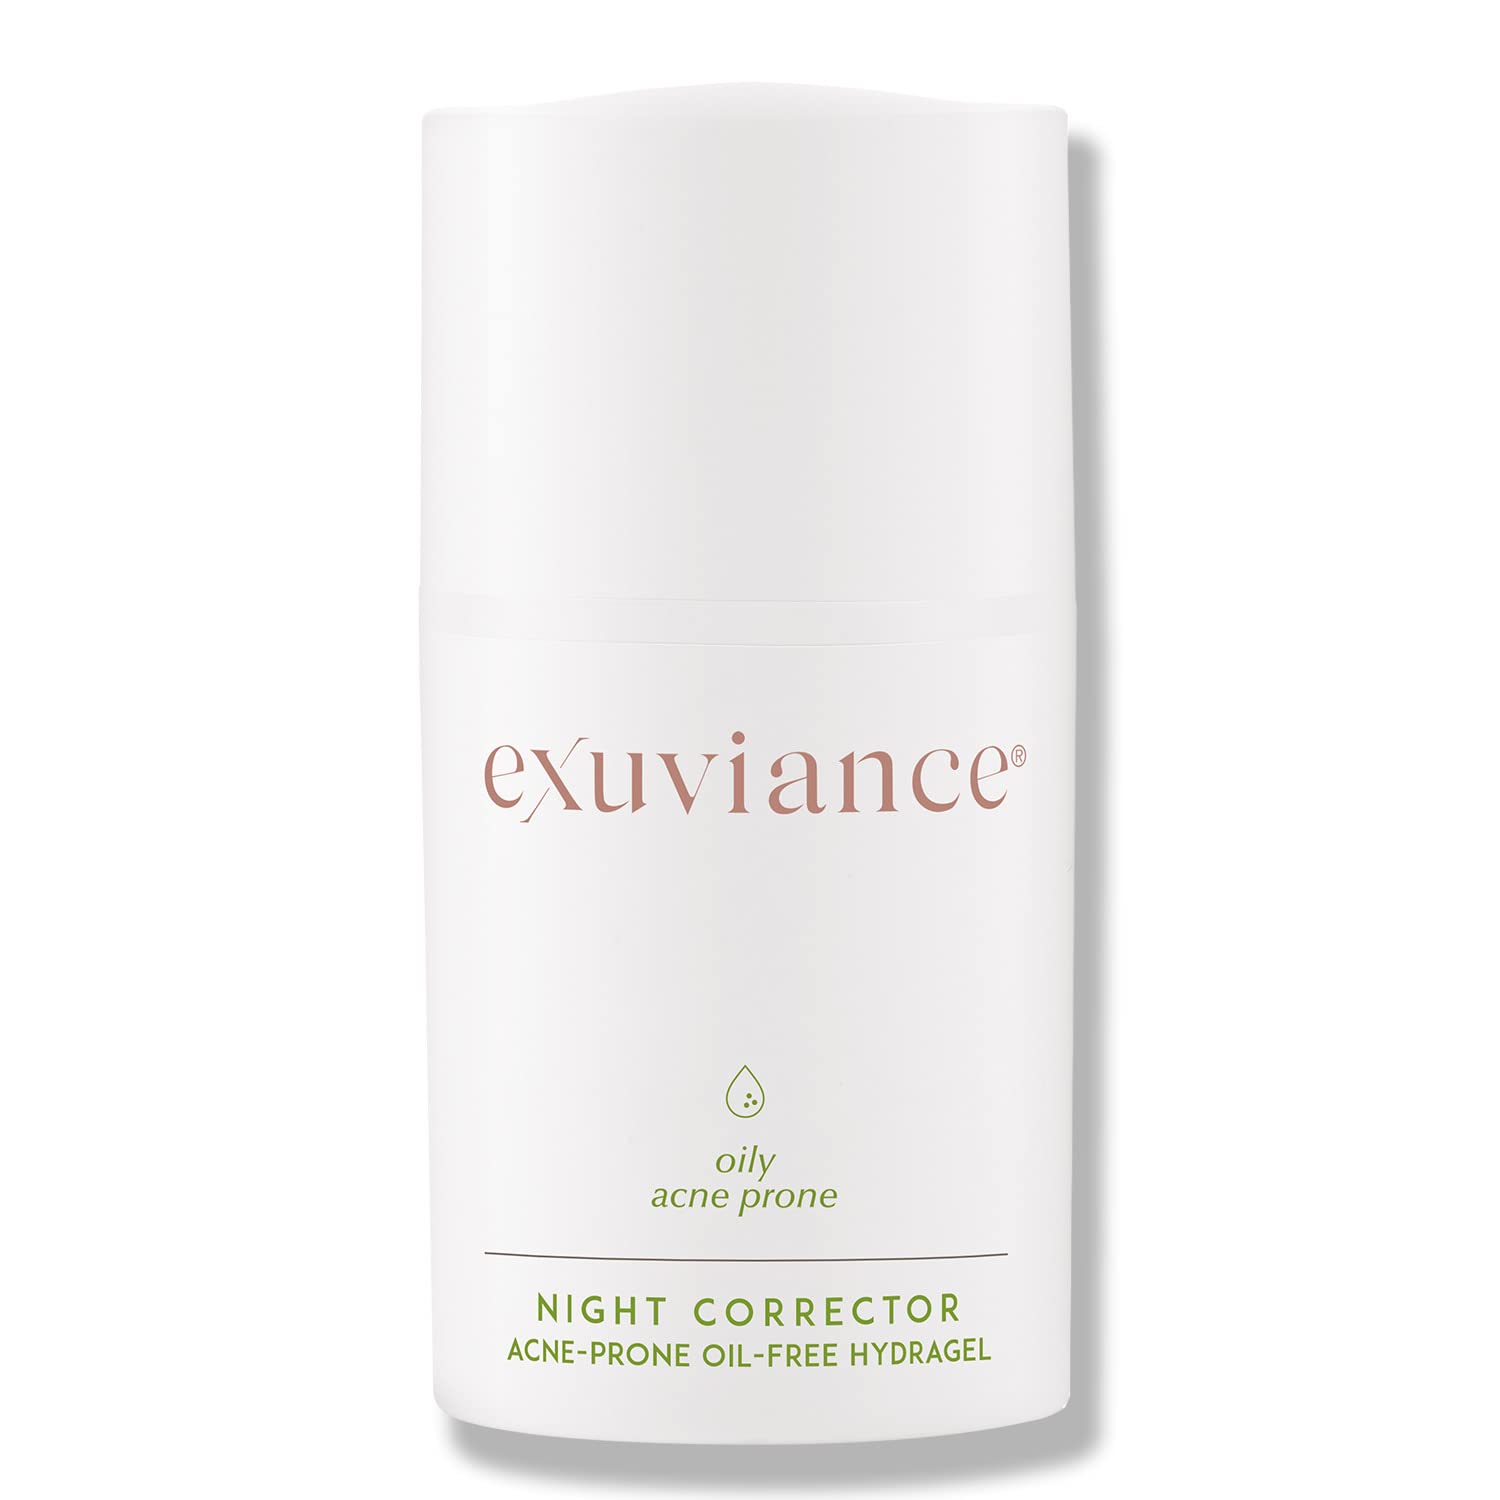 EXUVIANCE Night Corrector Lightly Hydrating Nighttime Gel with AHA/PHA Antiaging For Oily Skin, Oil-Free, Non-comedogenic, Non-acnegenic, 50 g